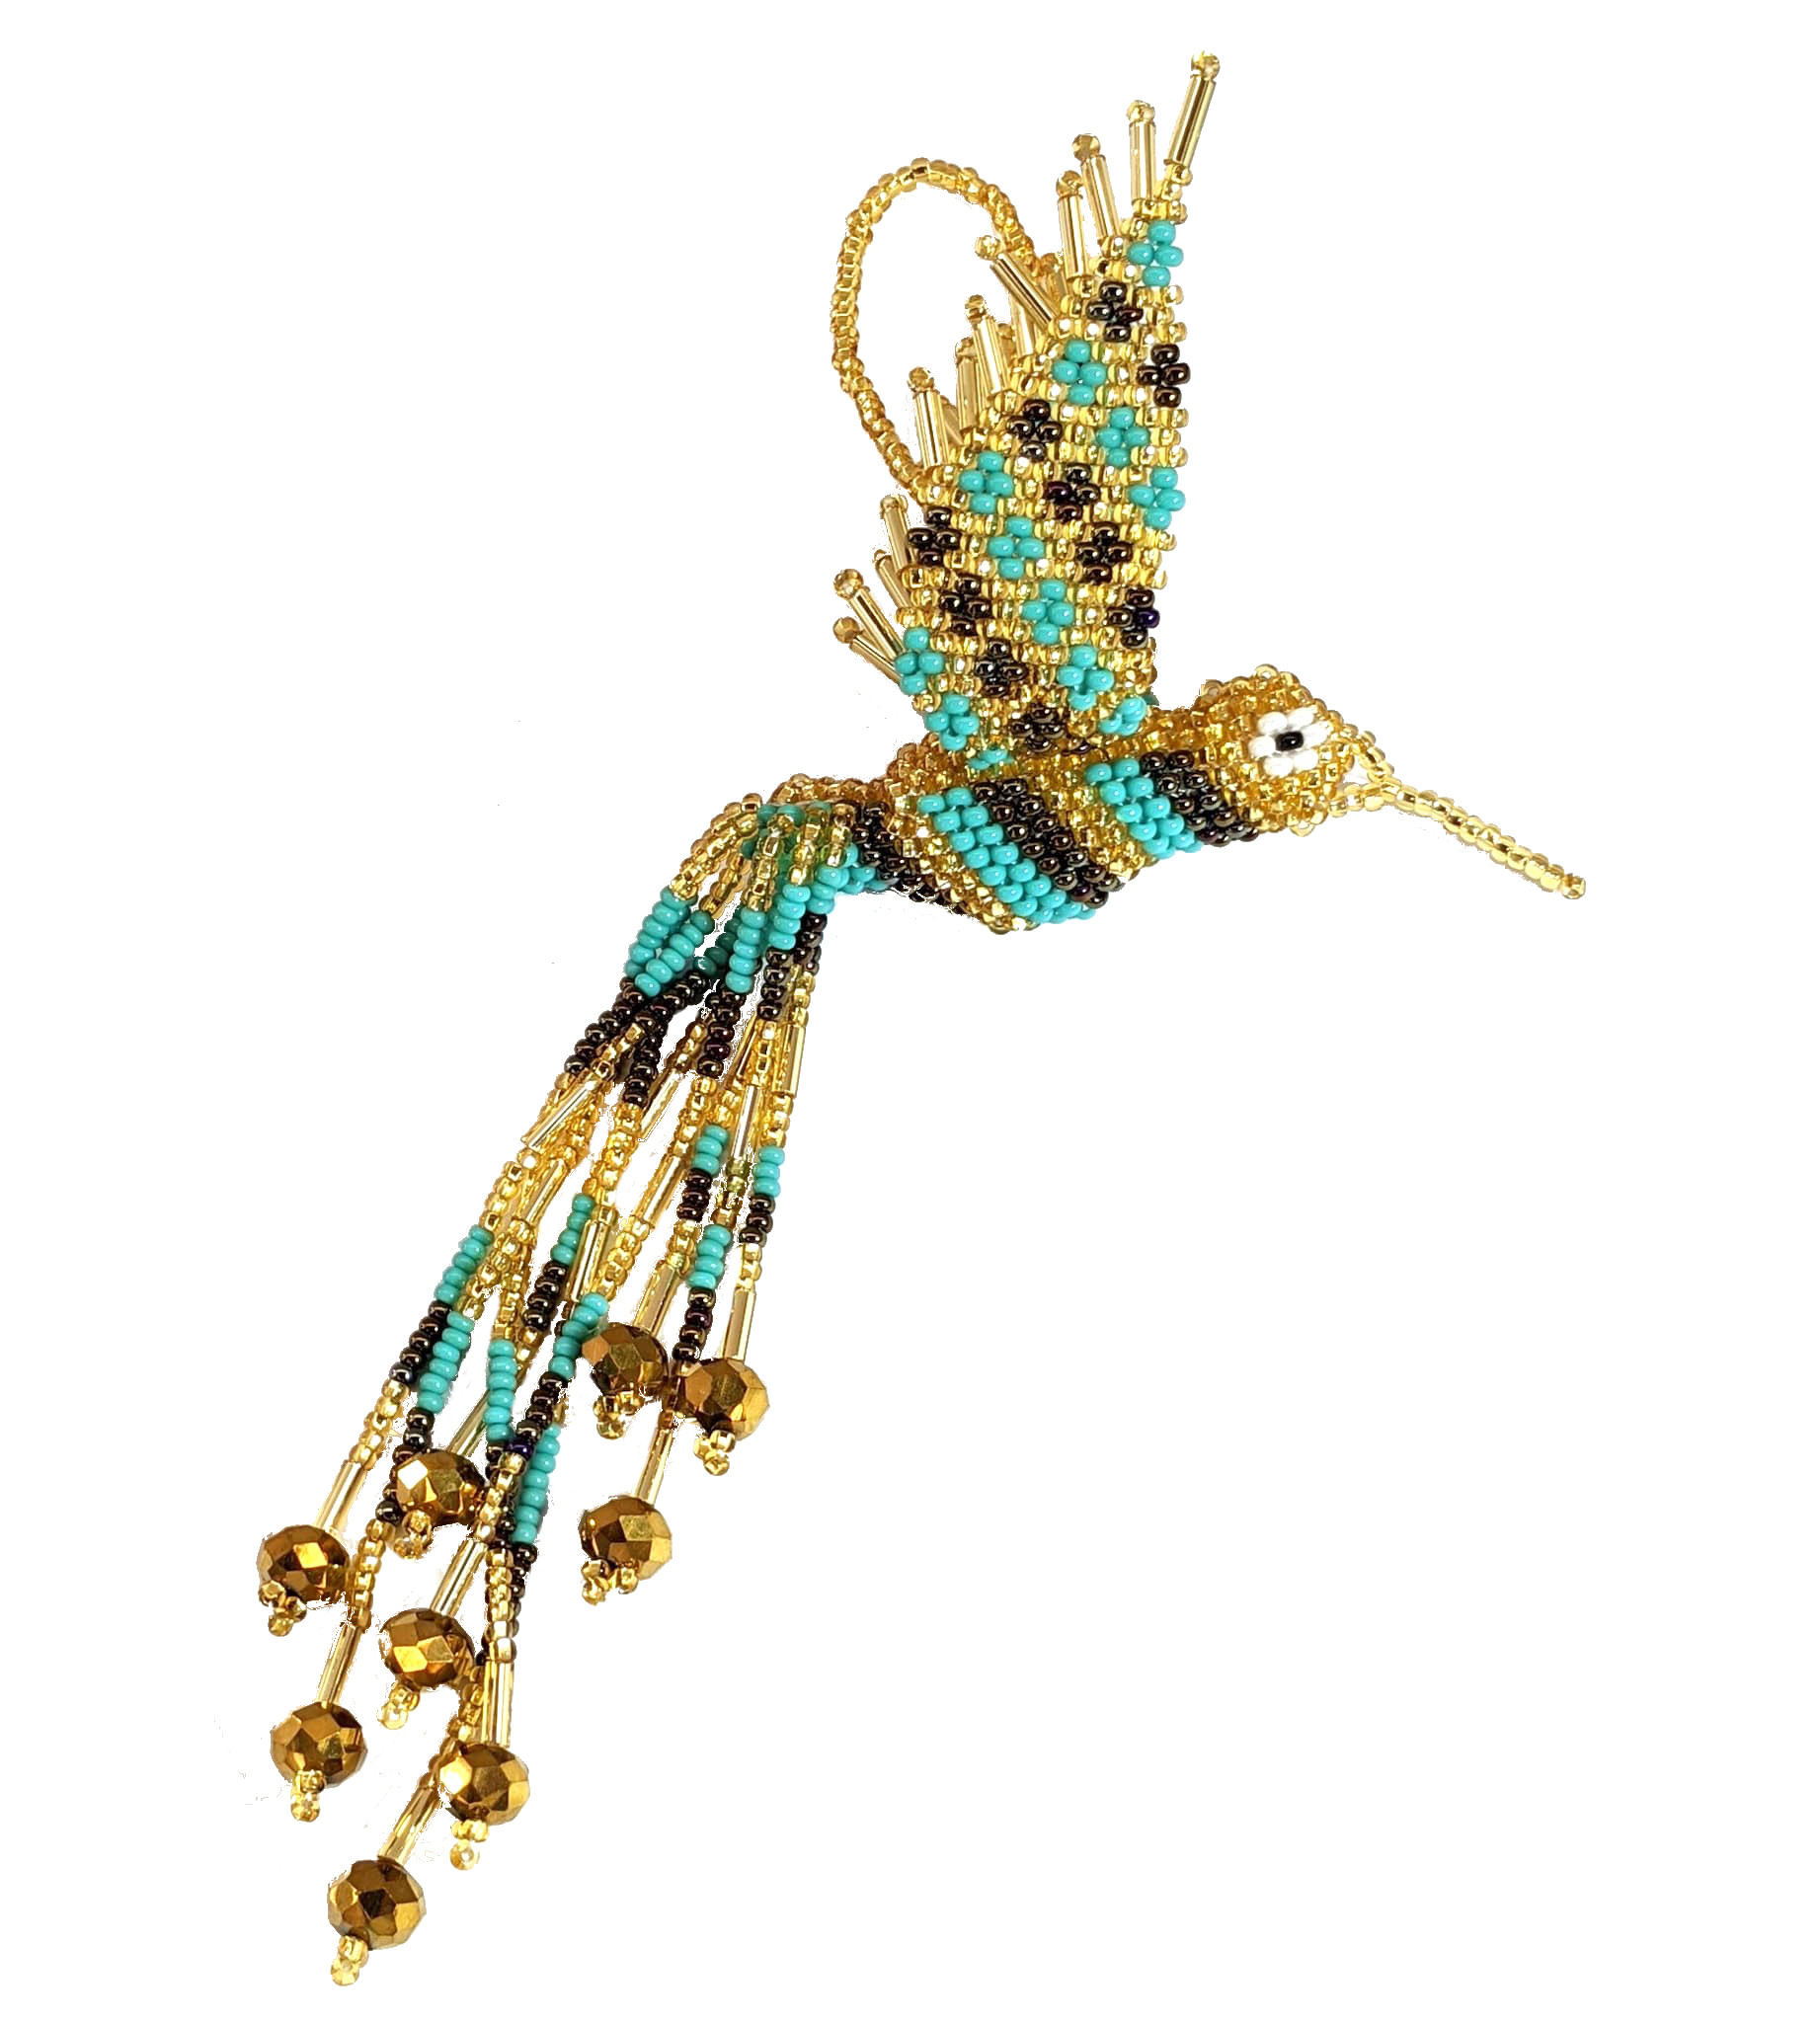 Hummingbird Beaded Ornament - Gold, Turquoise, and Iridescent Brown 